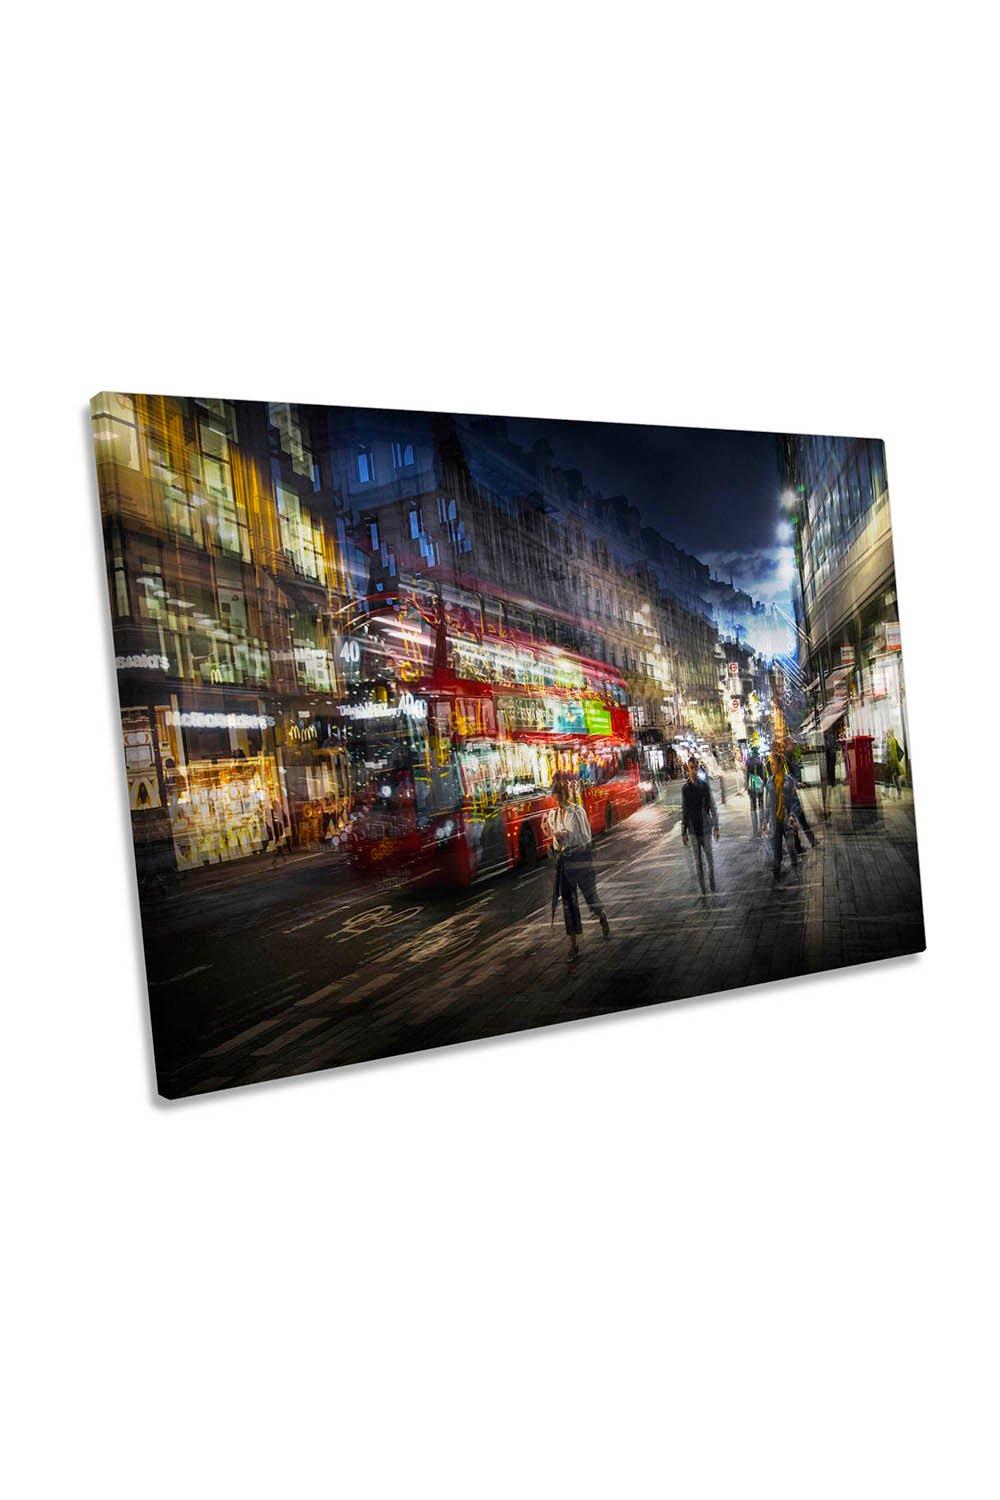 On the Streets of London City Canvas Wall Art Picture Print